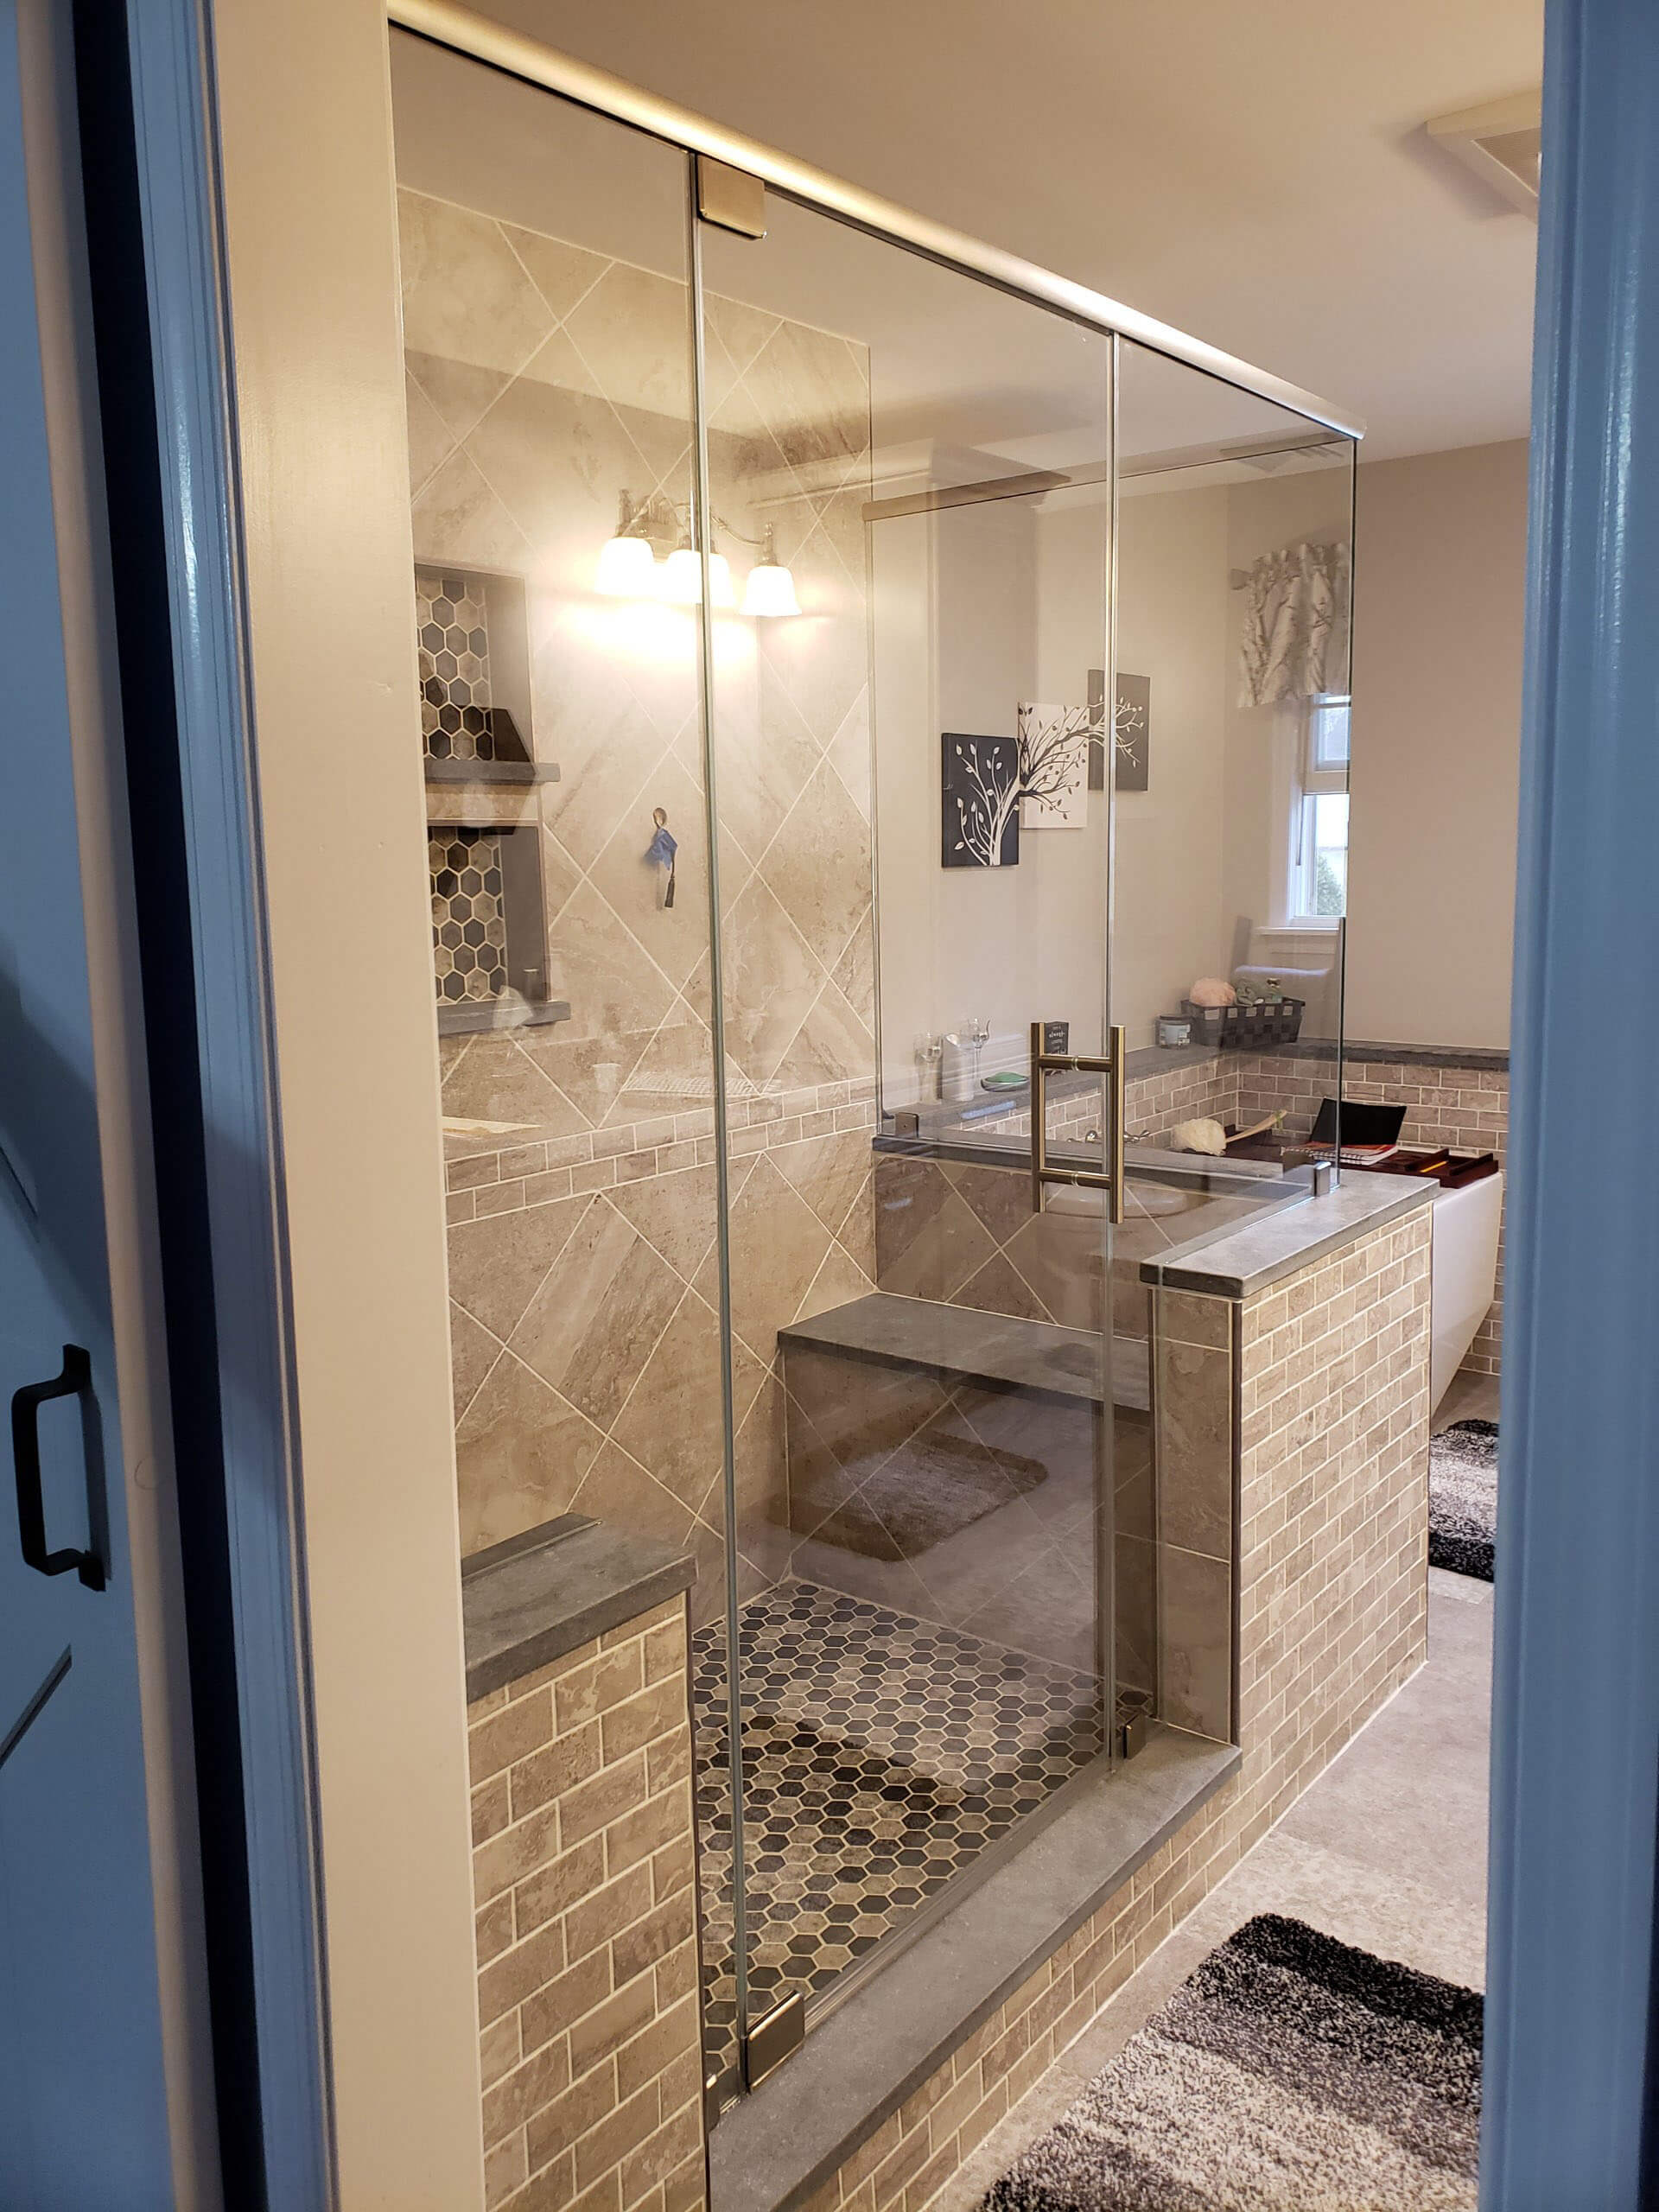 A beautiful new shower with large glass walls and door